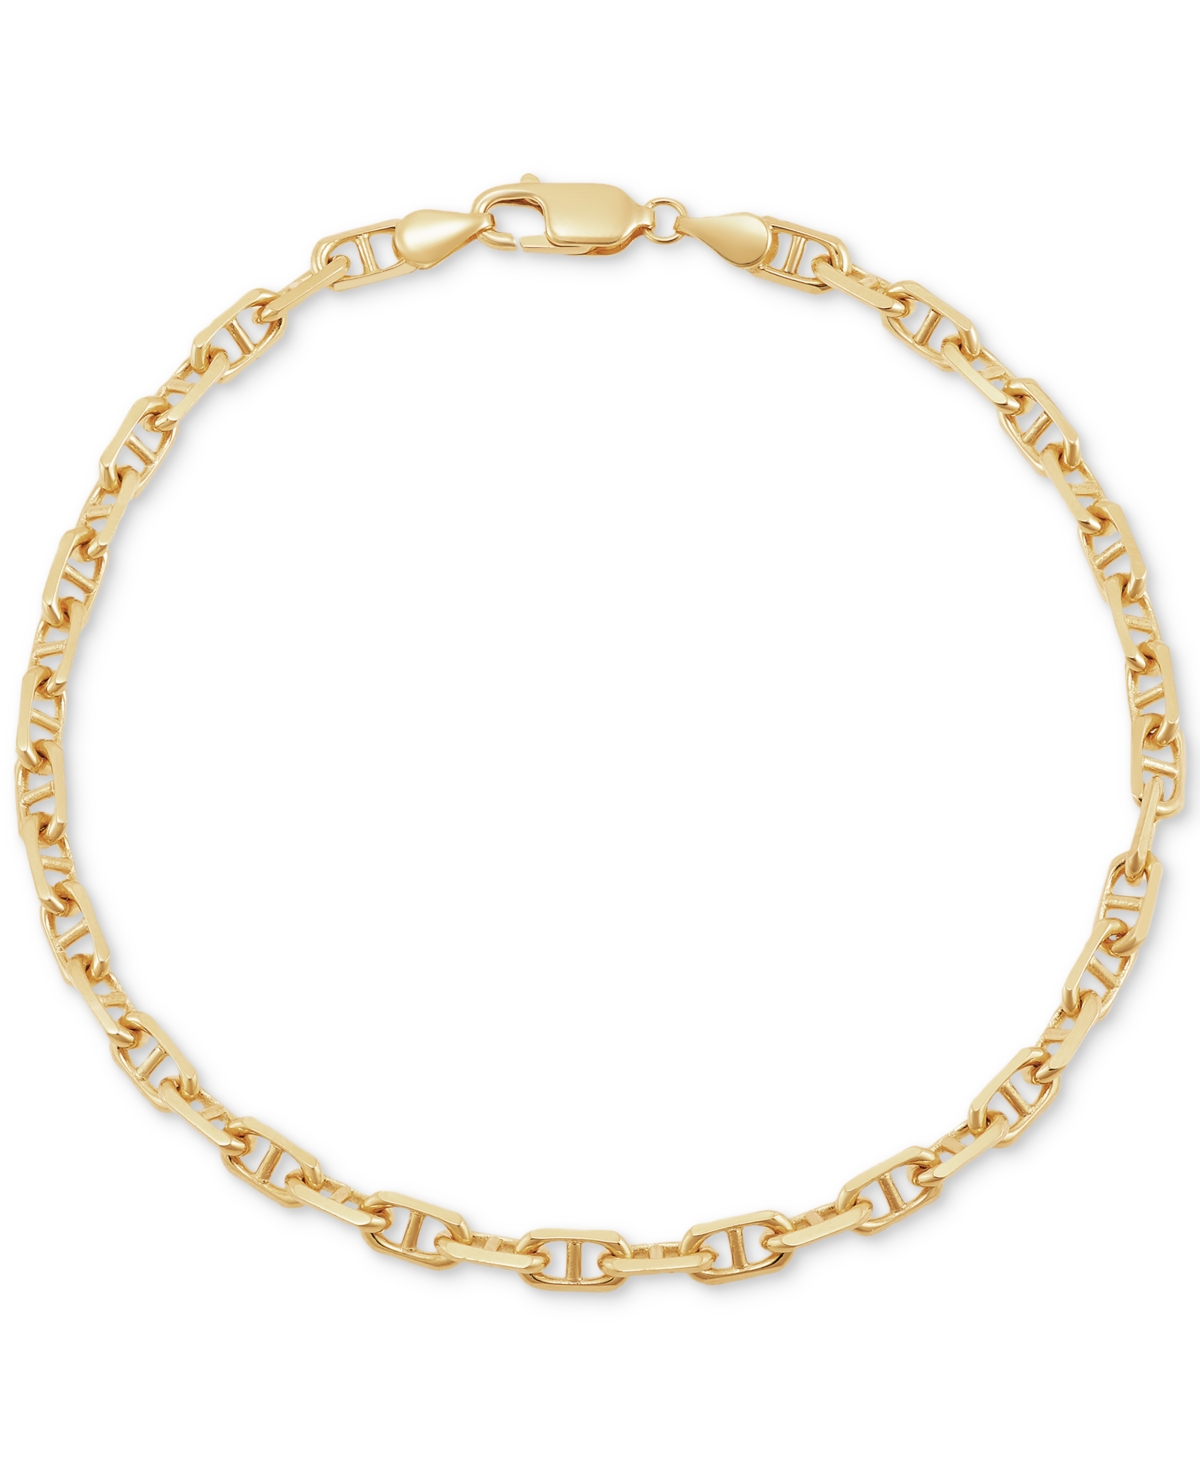 Polished Solid Anchor Link Chain Bracelet in 10k Gold - Yellow Gold